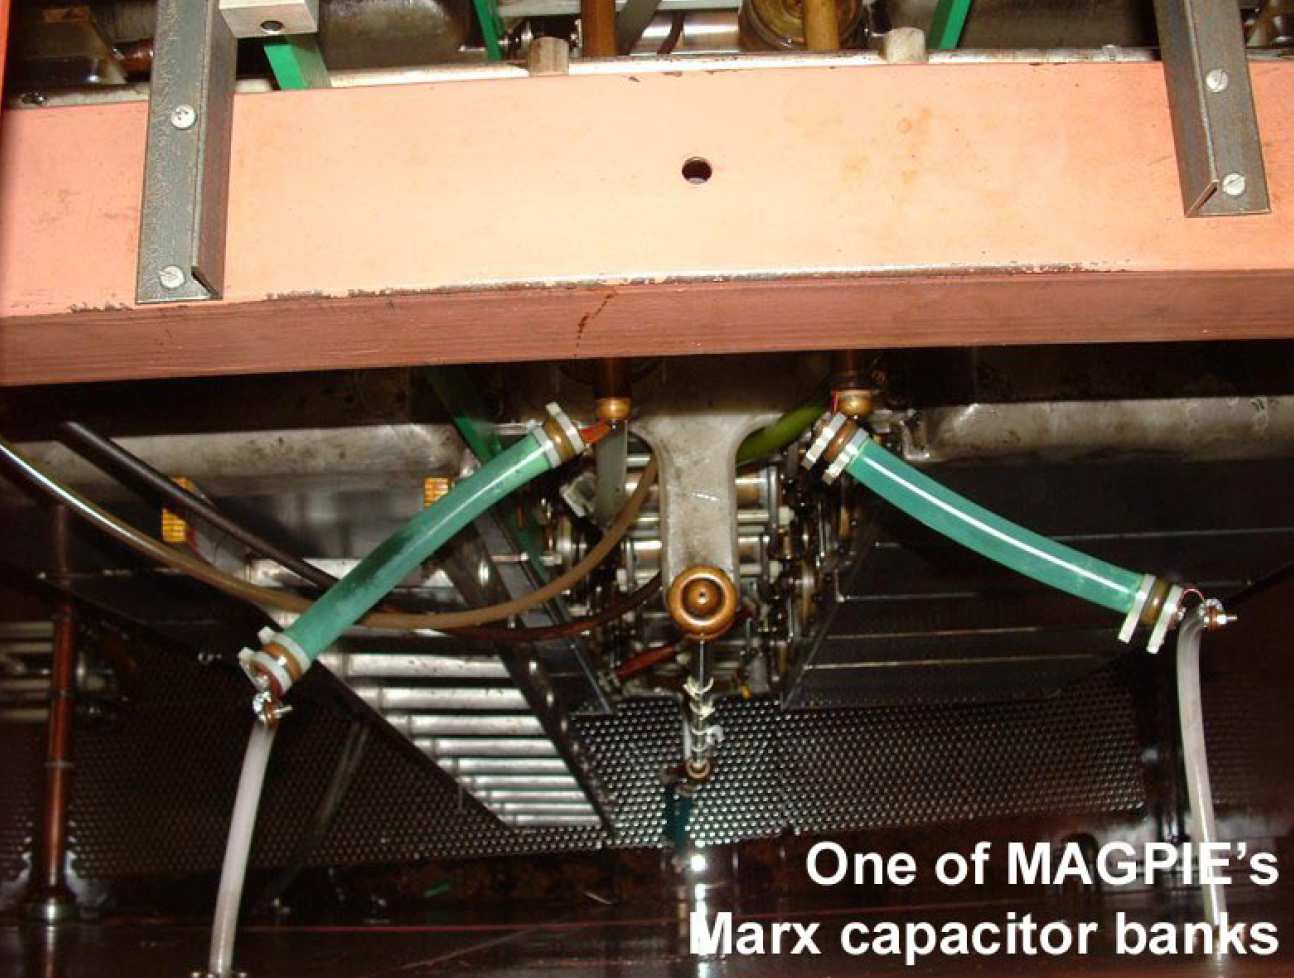 One of MAGPIE's Marx capacitor banks